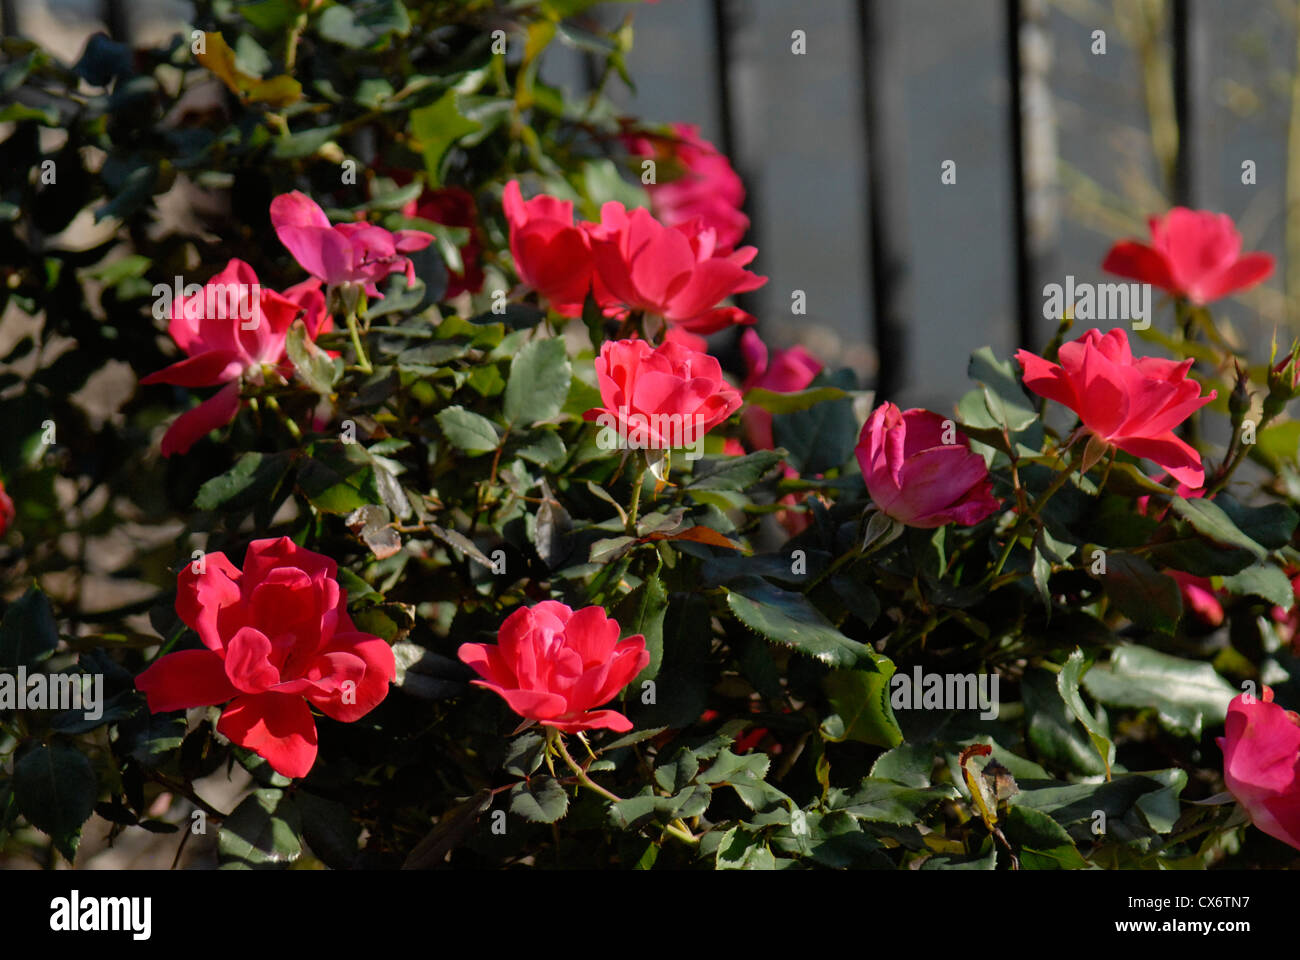 Shrub rose in Chicago garden. Cherry Red Knock Out rose. Stock Photo